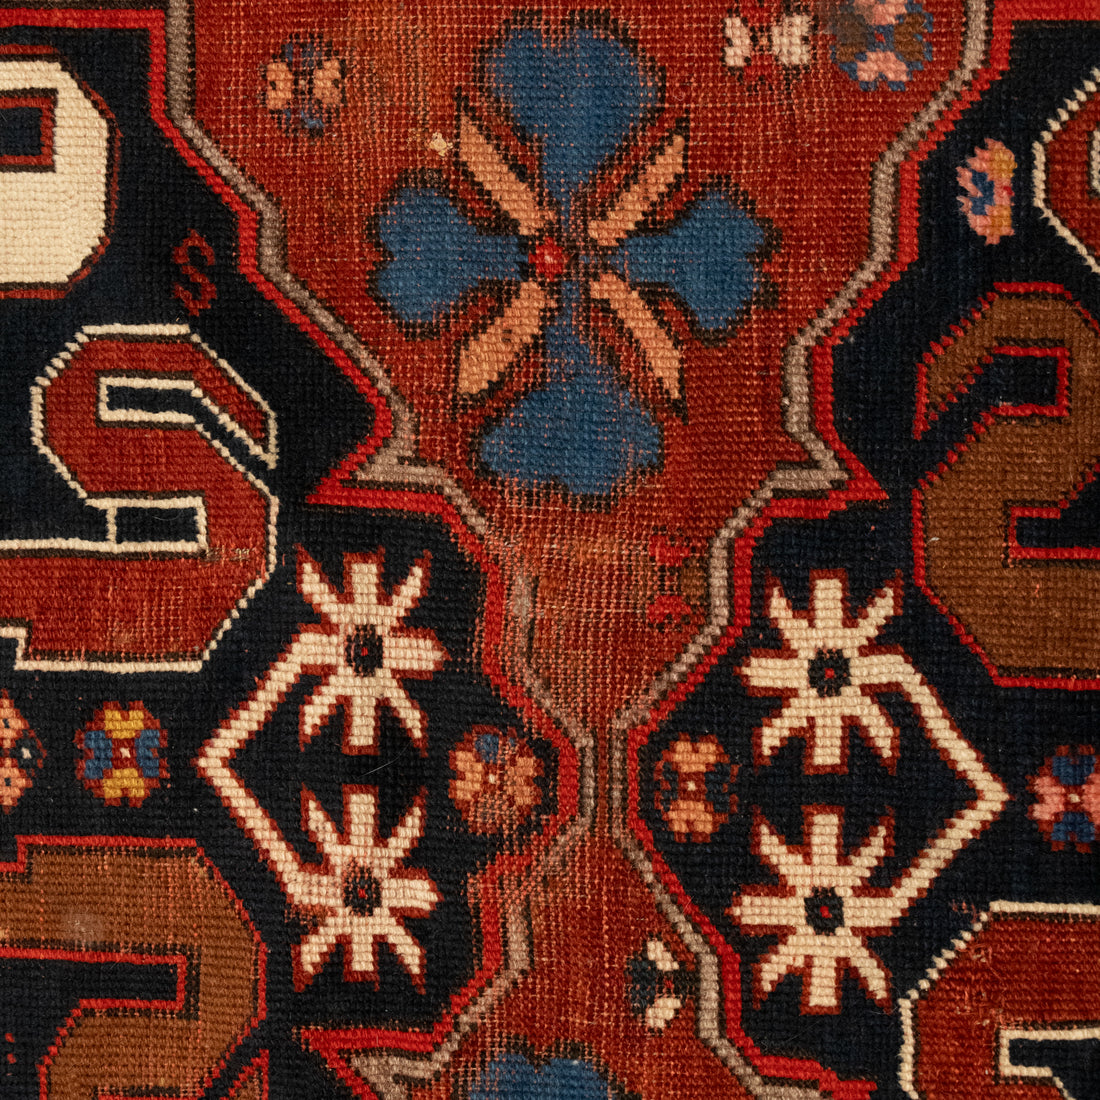 Hand-Knotted Antique Wool Rug 7'2" x 4'11"